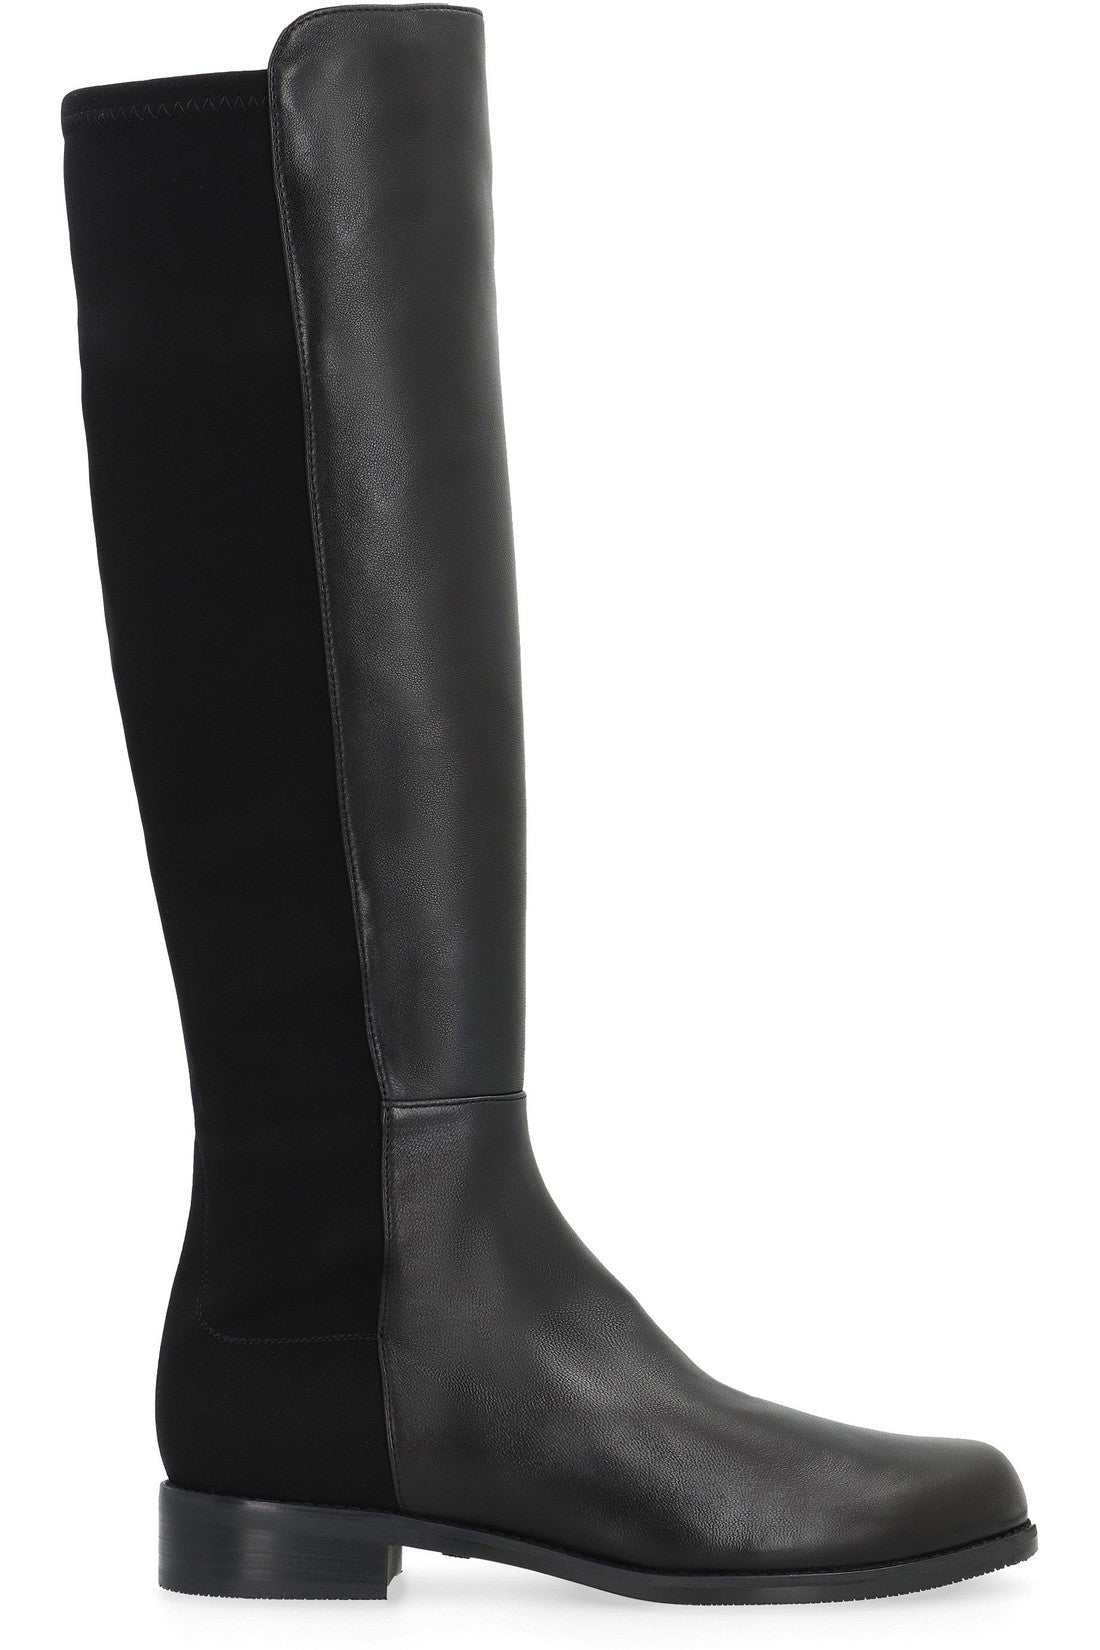 Stuart Weitzman-OUTLET-SALE-HALFNHALF leather and stretch fabric boots-ARCHIVIST